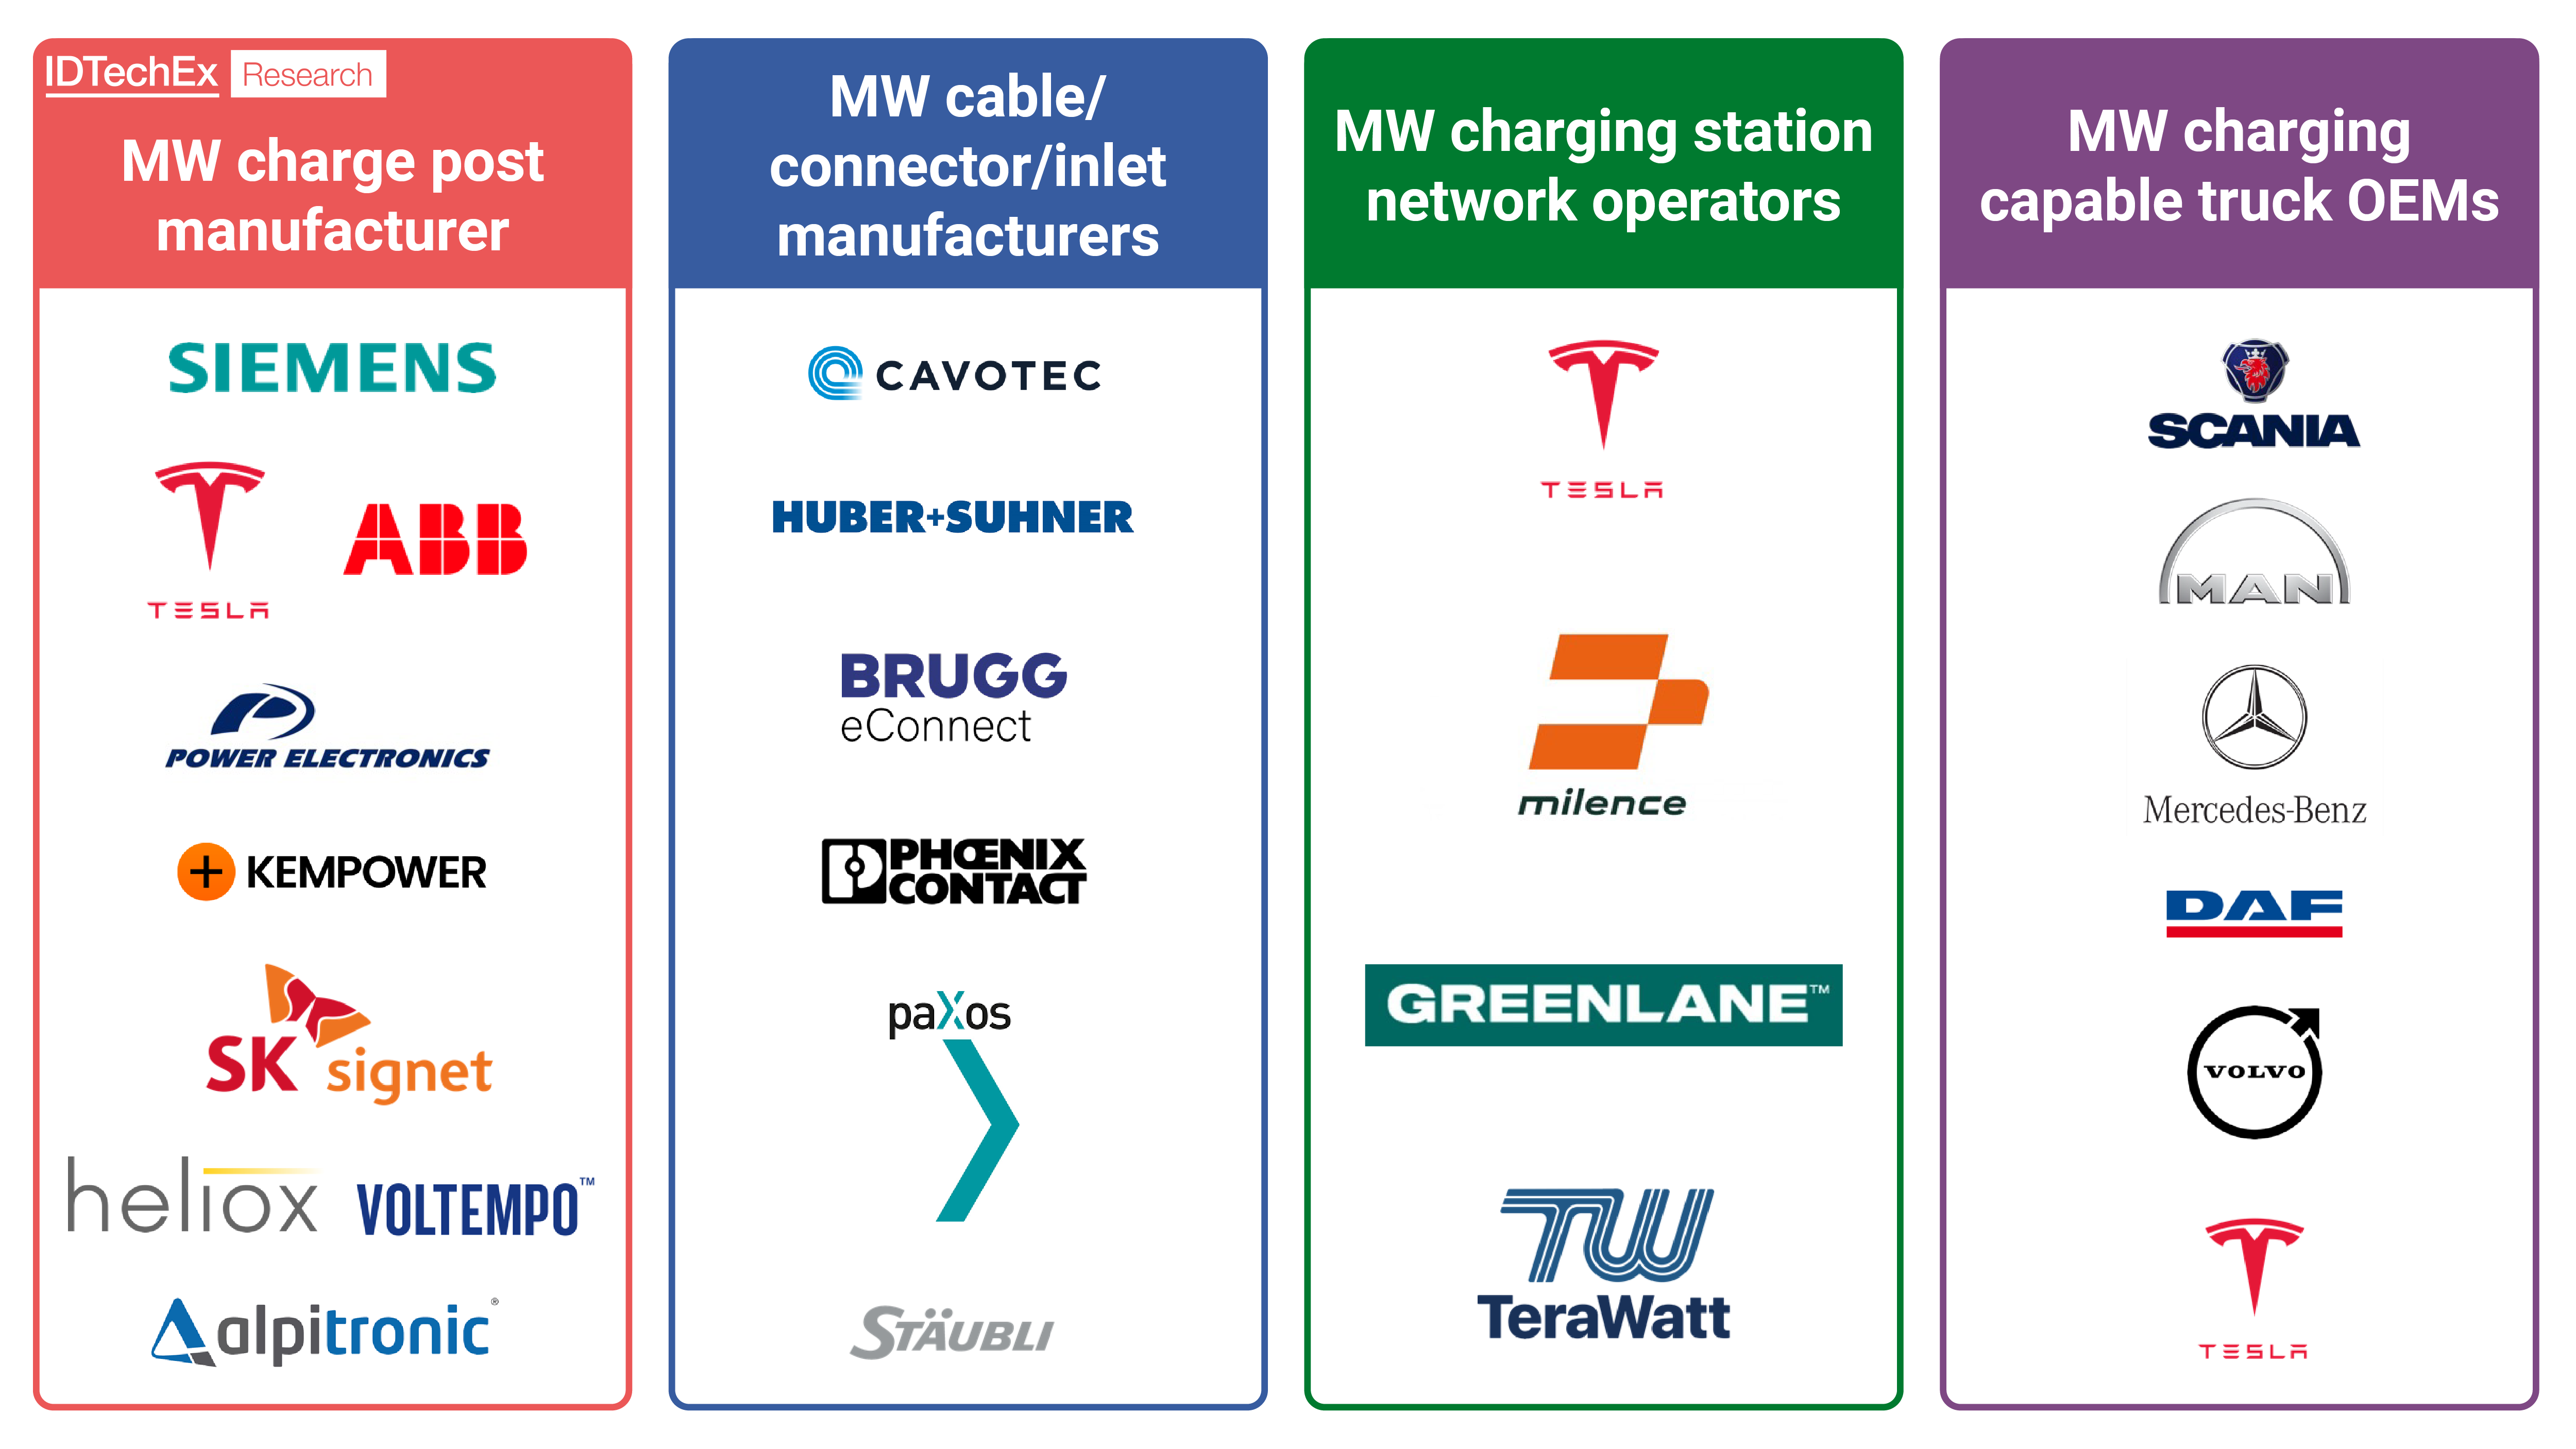 Megawatt charging player landscape. Lists are not exhaustive. Source: IDTechEx report 